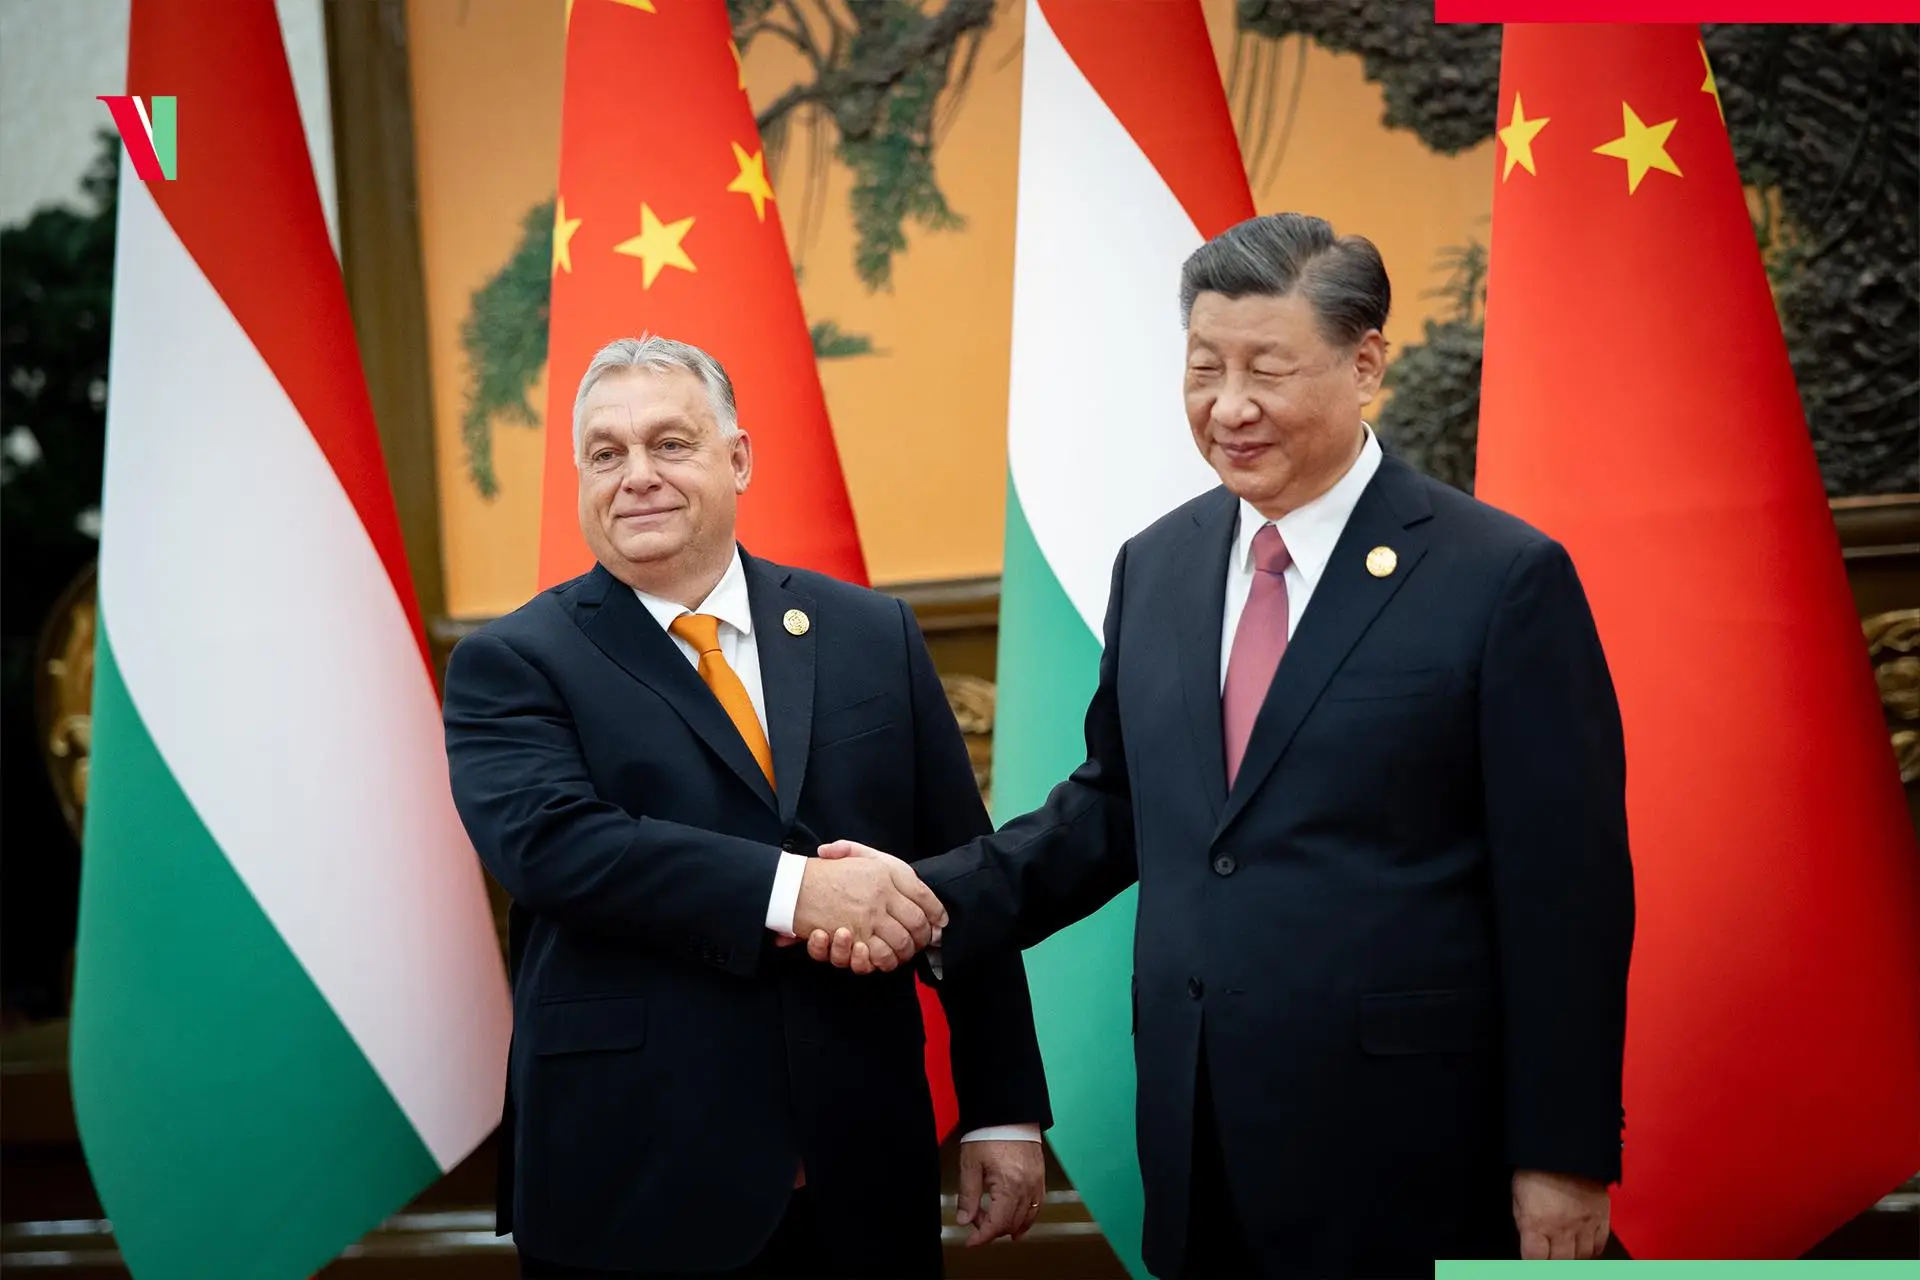 Xi Jinping revealed his thoughts on Hungarians in diplomatic op-ed